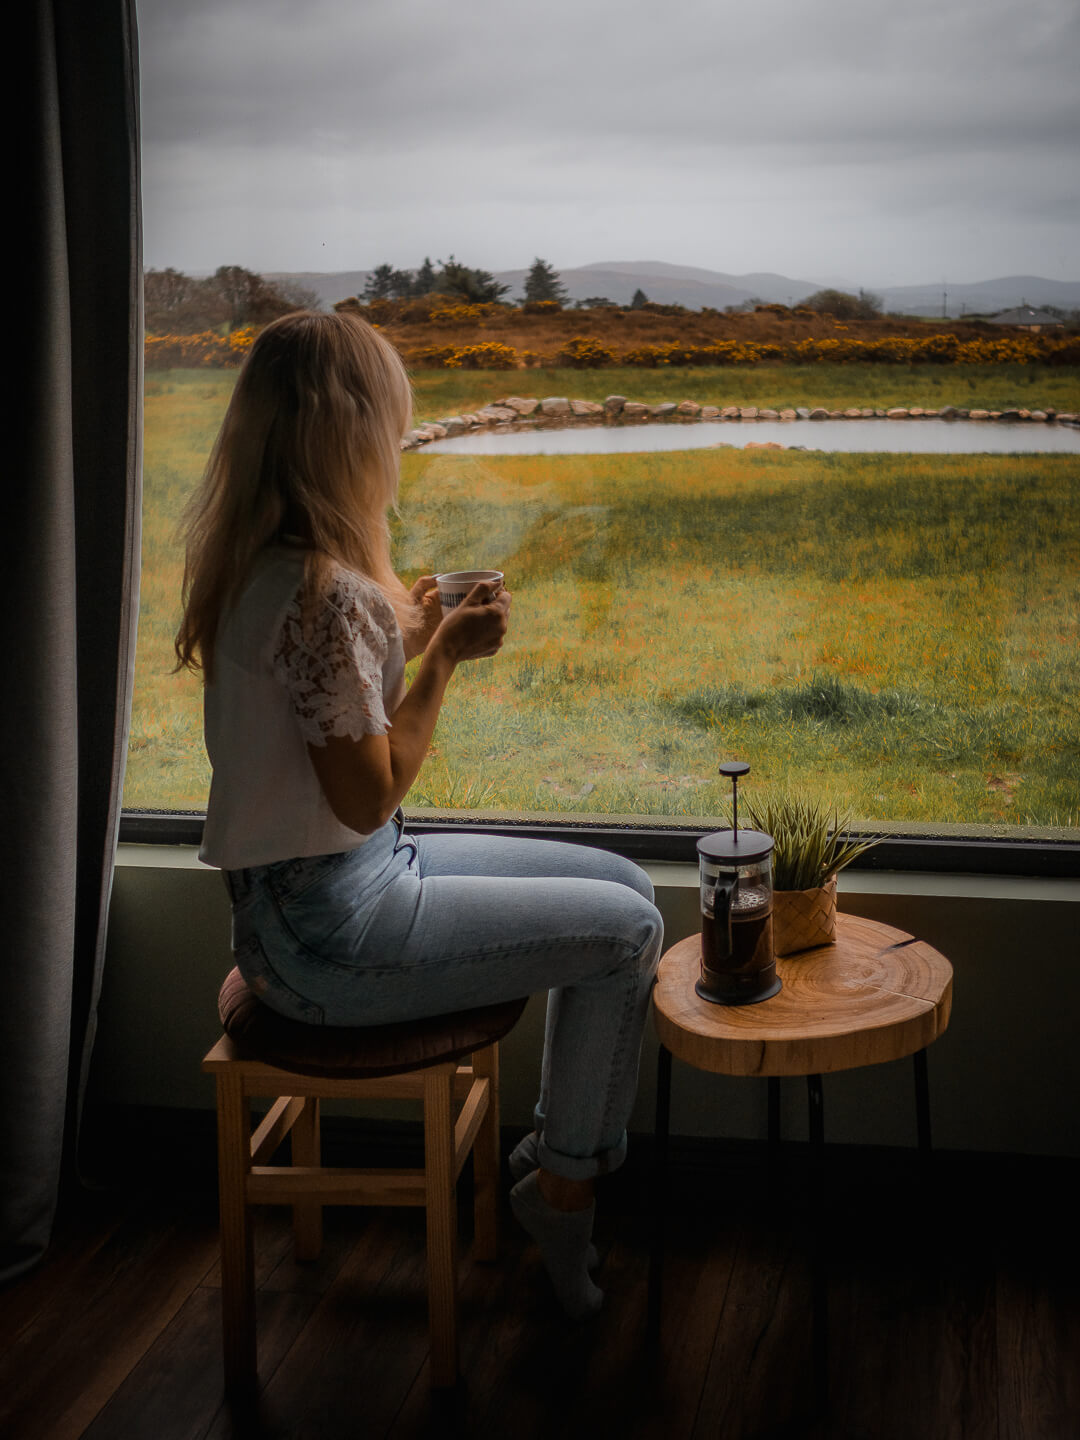 A women sitting in front of a big window watching the Irish landscape and drinking a coffee.